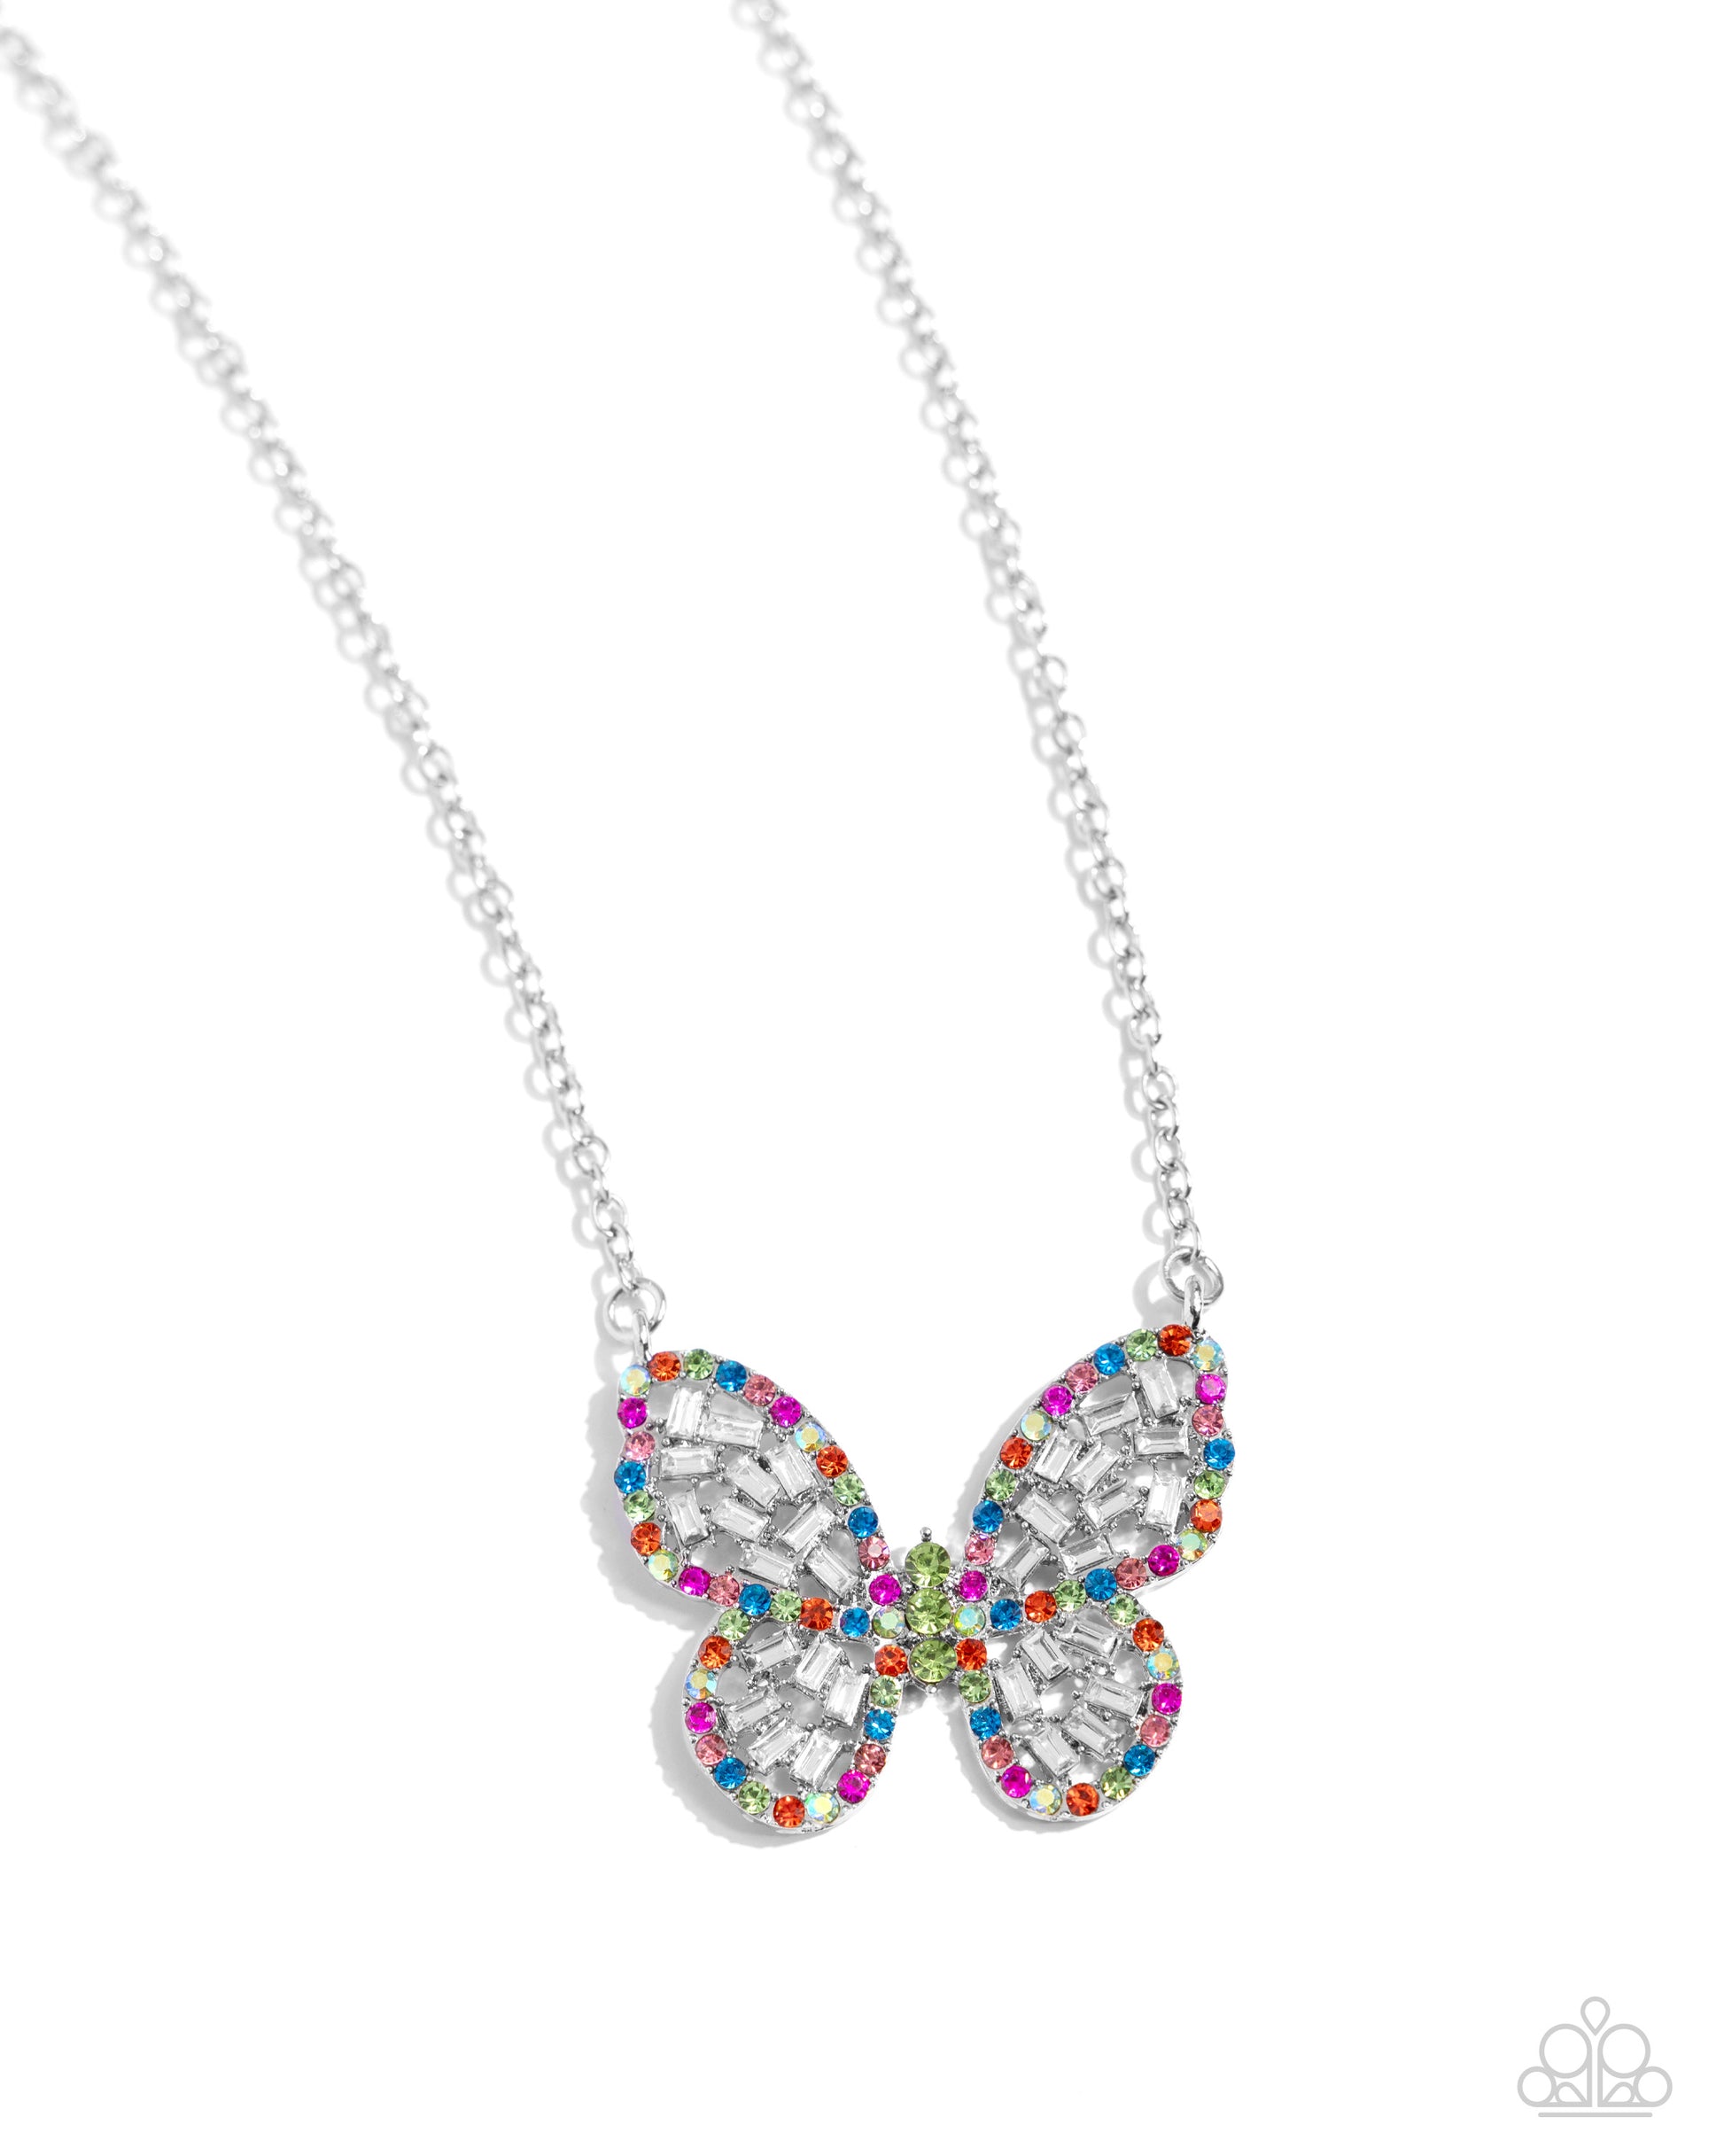 <p>Paparazzi Accessories - Aerial Academy - Green Butterfly Necklaces bordered in multicolored and iridescent rhinestones, a collection of white emerald-cut dainty gems scatter across the interior of the airy silver butterfly. Additional dainty green rhinestones create the body of the butterfly for a further splash of color and whimsy. Features an adjustable clasp closure. Due to its prismatic palette, color may vary.</p> <p><i>Sold as one individual necklace. Includes one pair of matching earrings.</i></p>